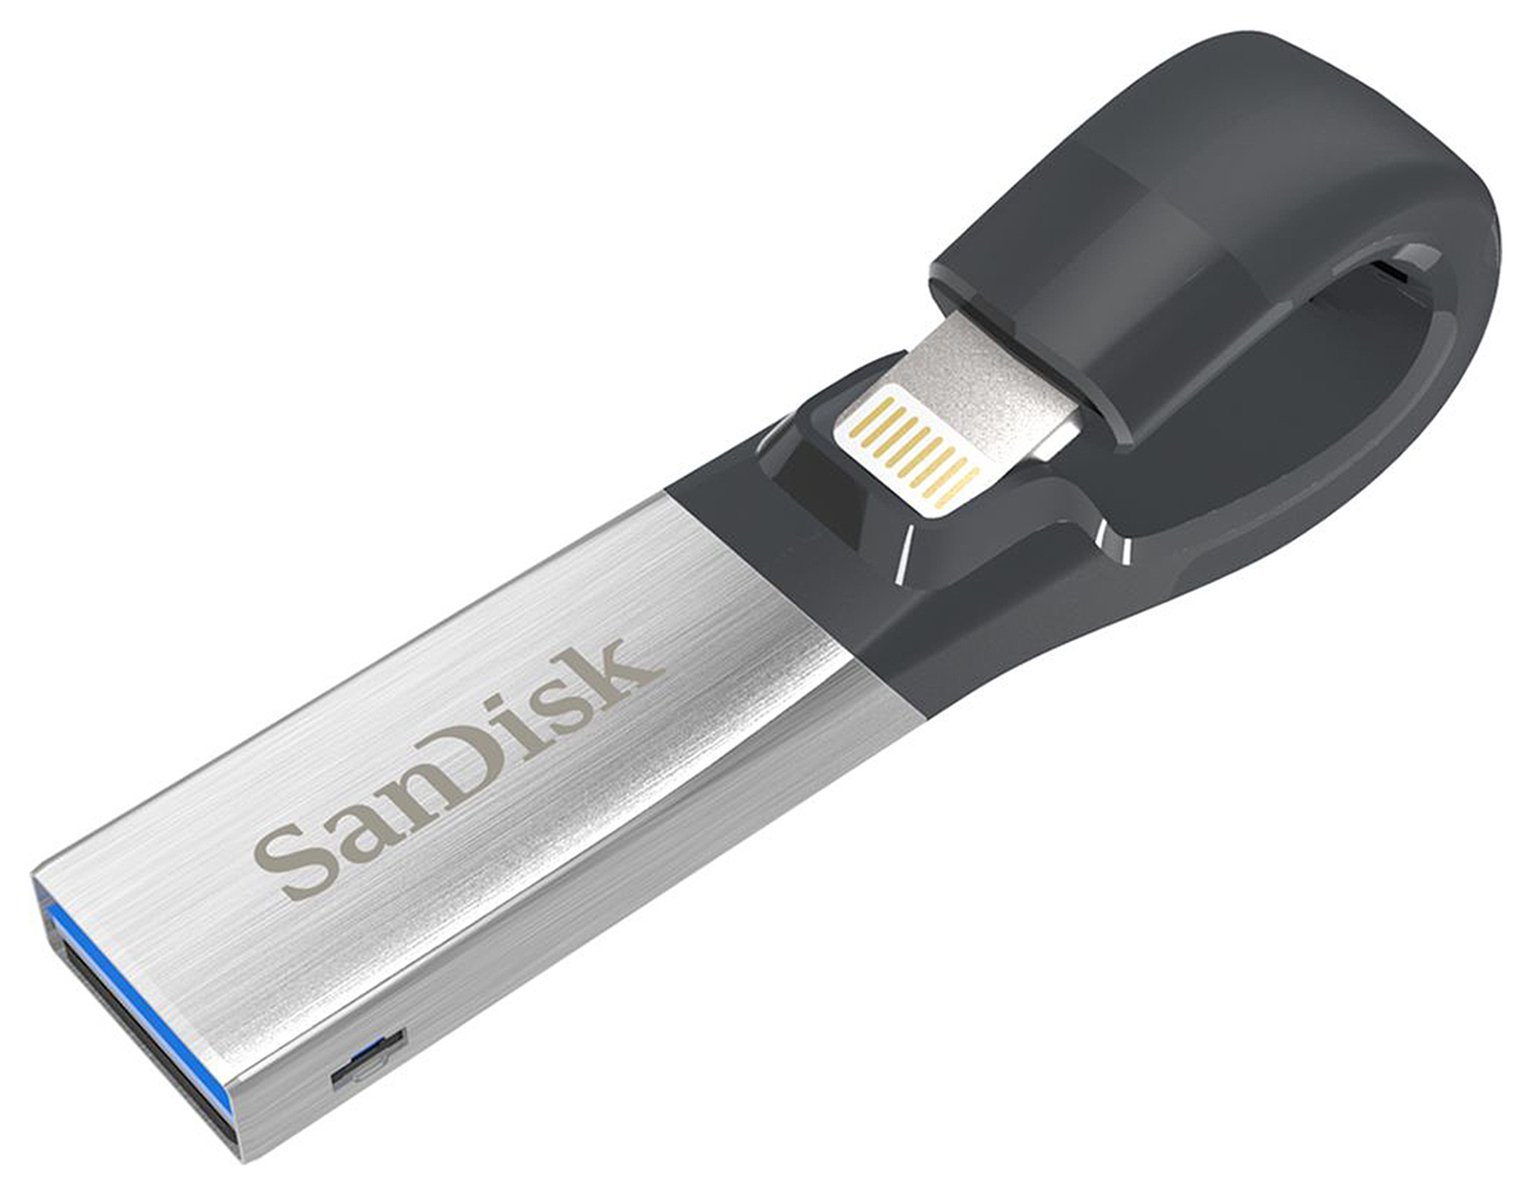 SanDisk iXpand 64GB Flash Drive for iPhone and iPad Review